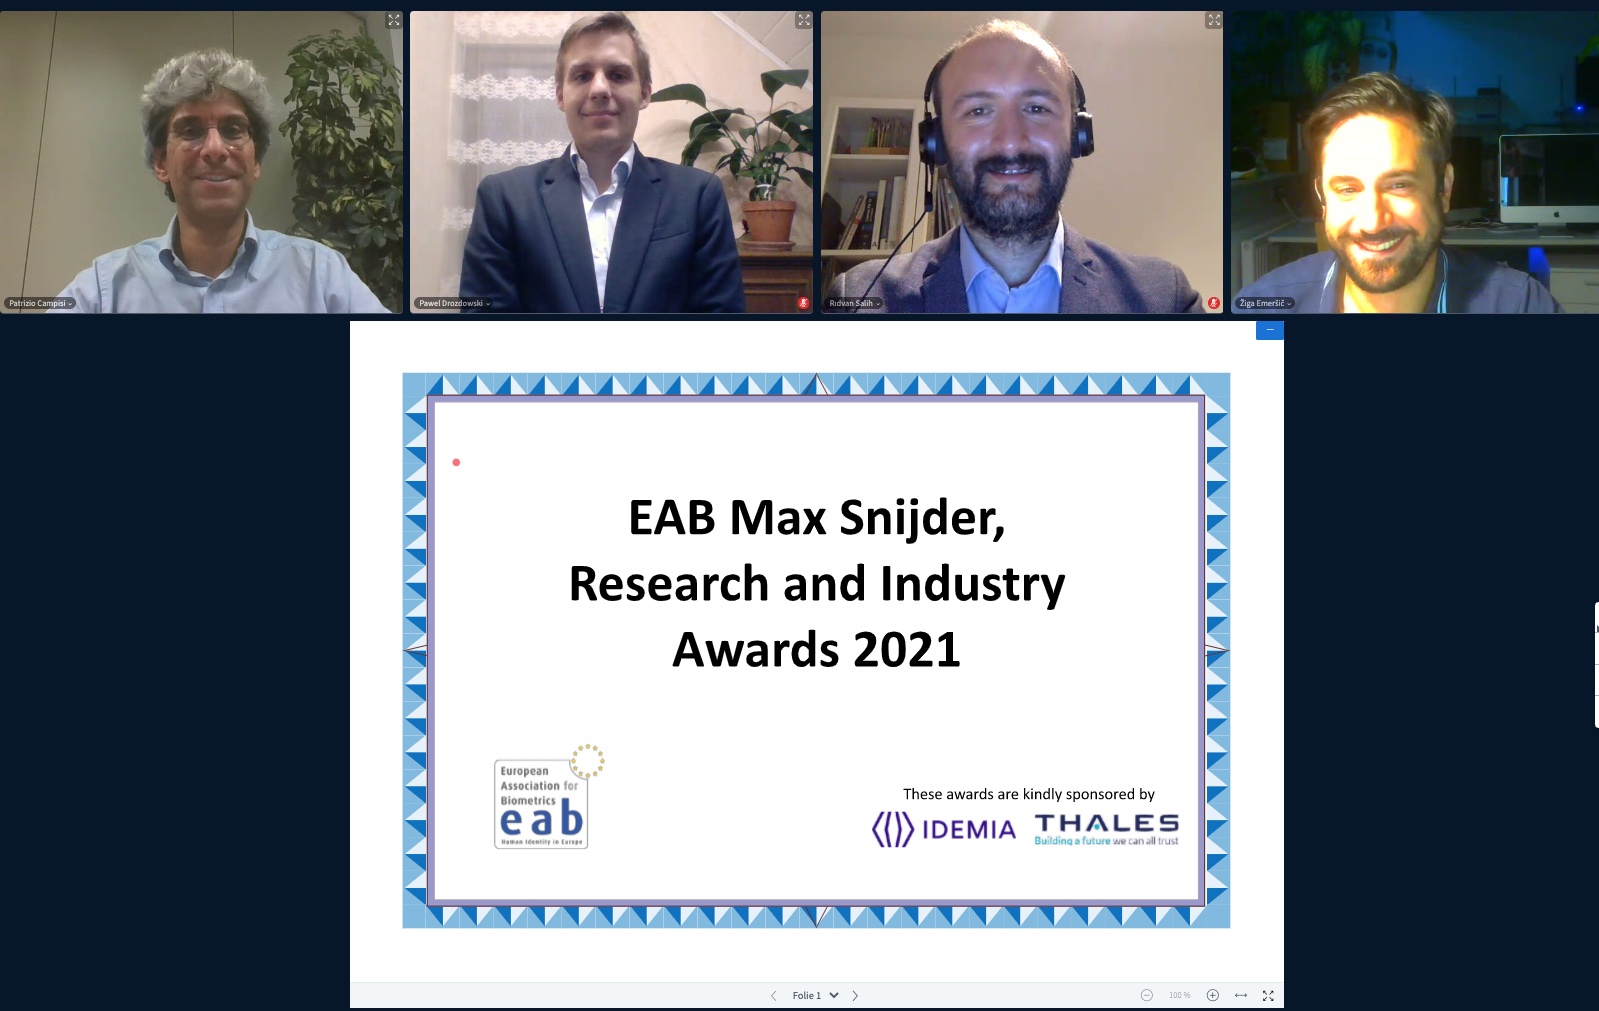 [Photo] The winners of the European Biometrics Industry, Research, and Max Snijder Awards 2021 Pawel Drozdowski (Hochschule Darmstadt, Germany and Norwegian University of Science and Technology, Norway), Rıdvan Salih Kuzu (Roma Tre University, Italy) and Žiga Emeršič (University of Ljubljana, Slovenia) together with the Chairman of the Award Commission Prof. Patrizio Campisi